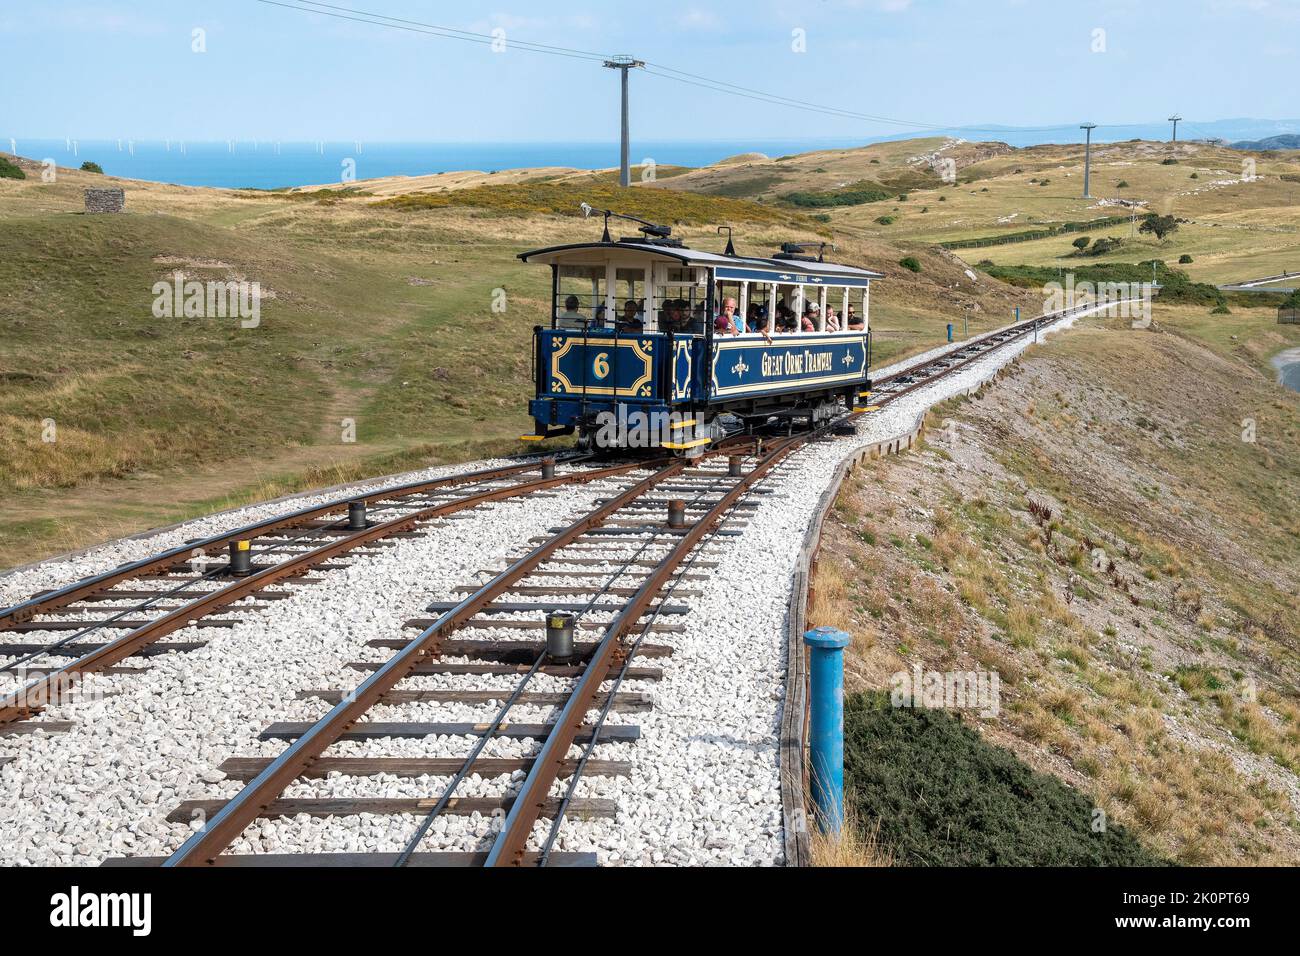 The Great Orme Tramway is a cable-hauled 3 ft 6 in gauge tramway in Llandudno in North Wales. Stock Photo